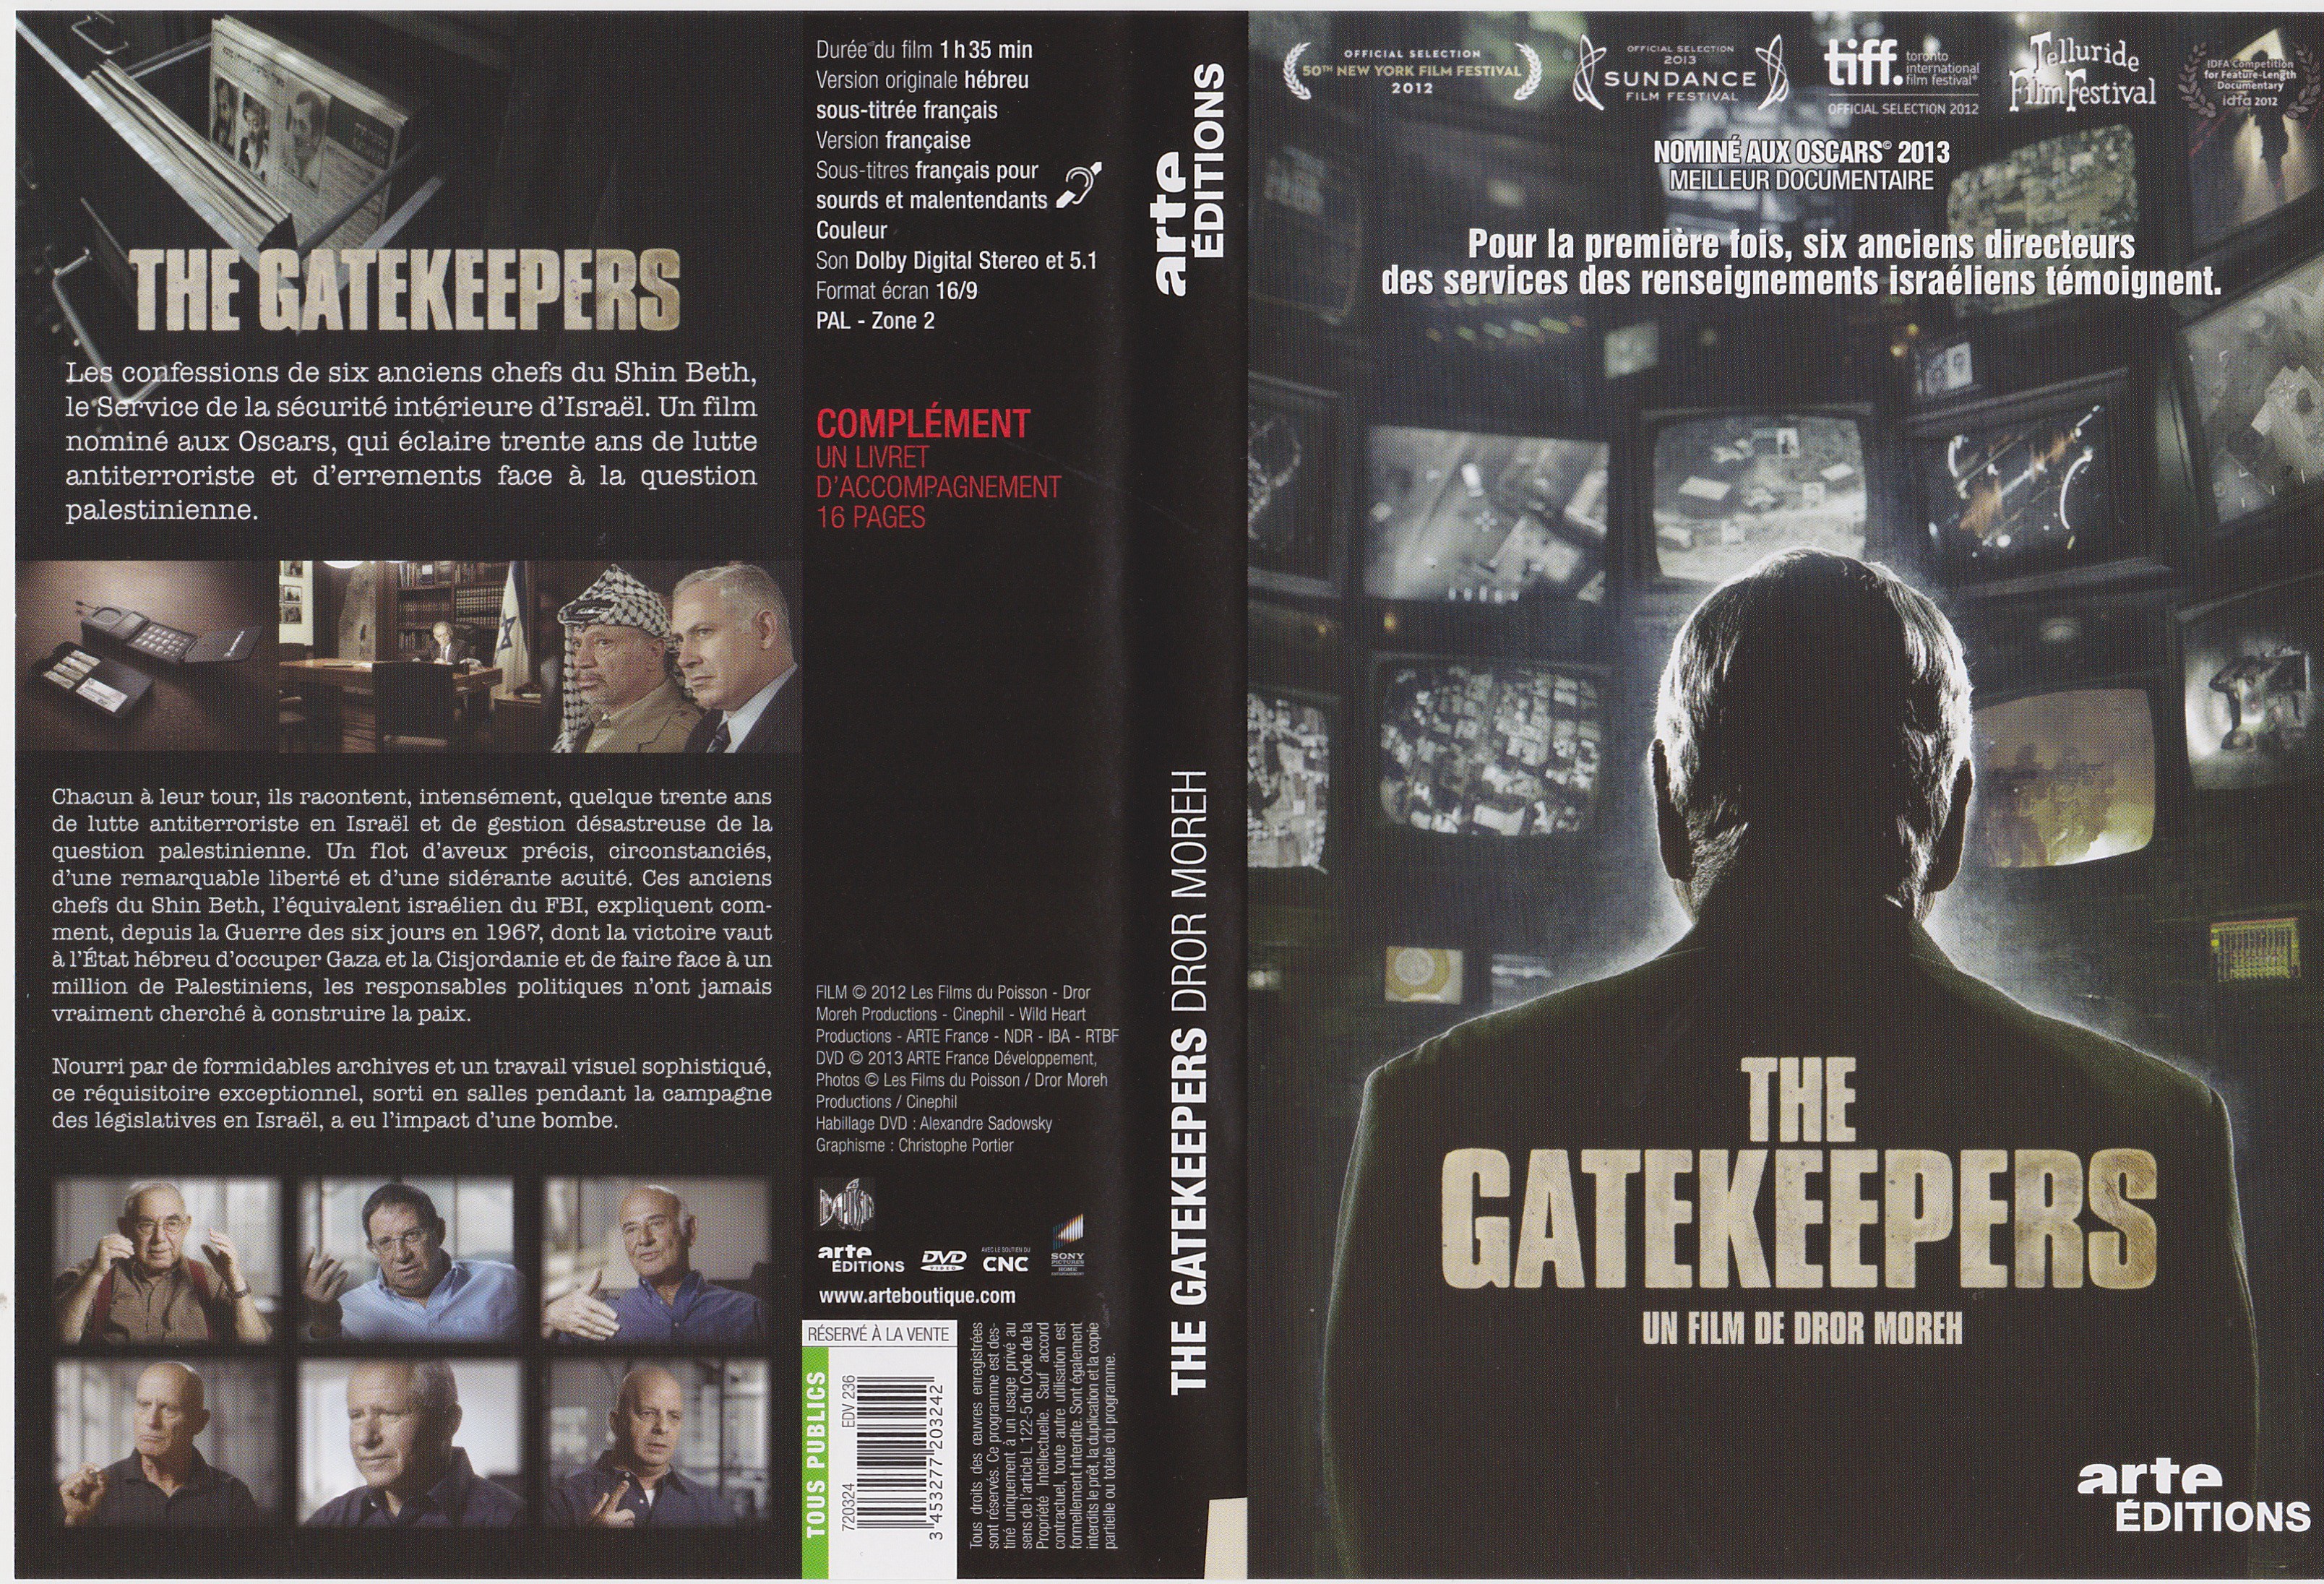 Jaquette DVD The Gatekeepers